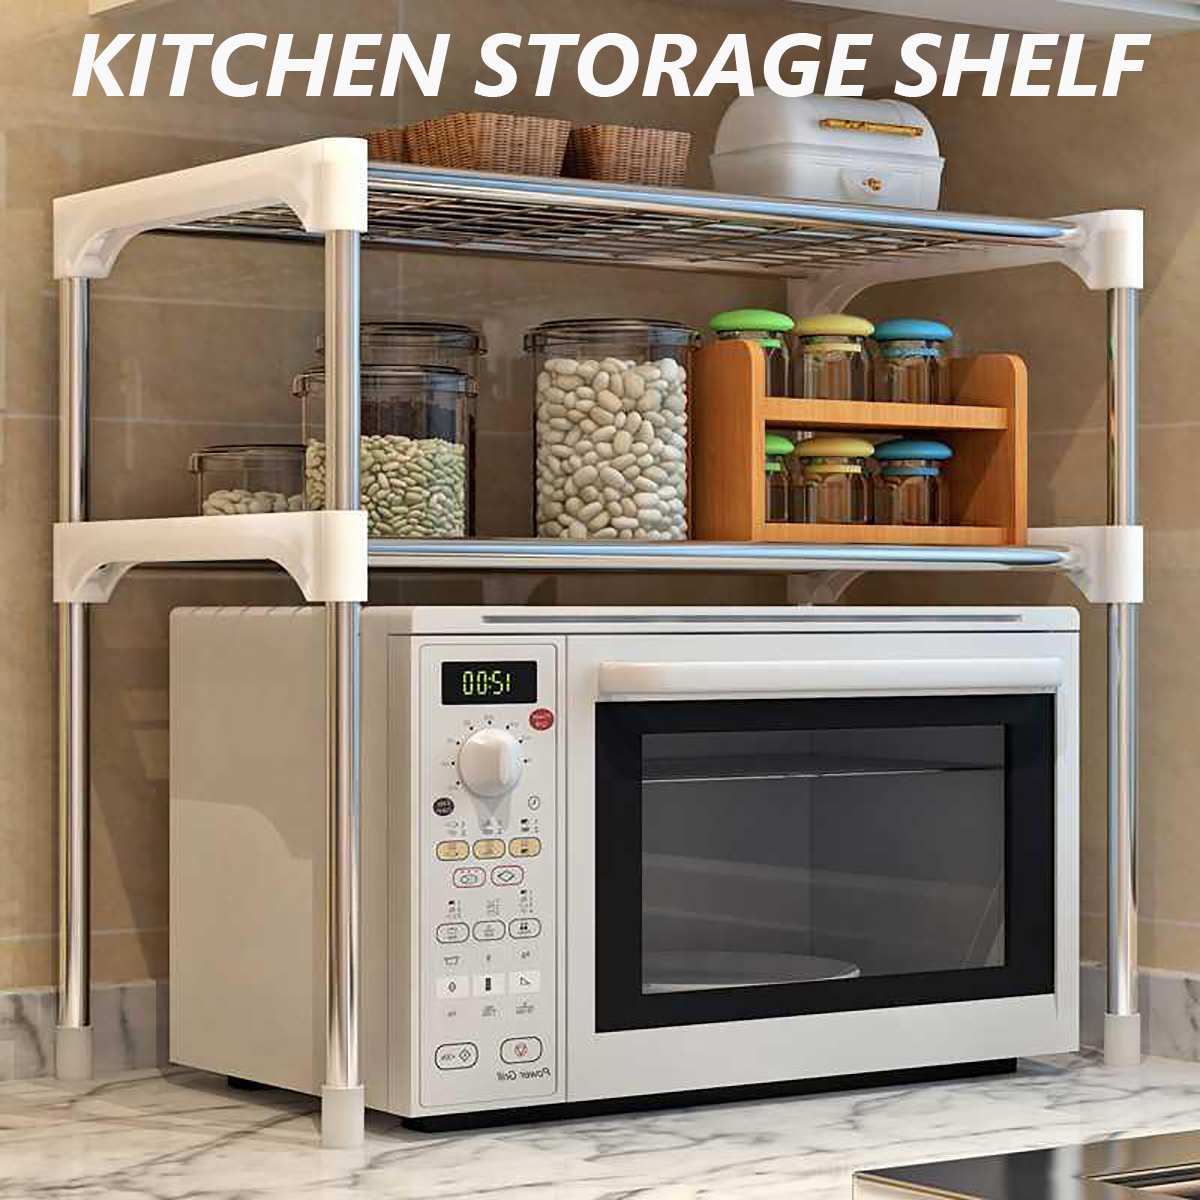 

Muti-functiona Microwave Oven Shef Rack Standing Kitchen Storage Hoders Home Bathroom Towes Rack Office Storage Sheve